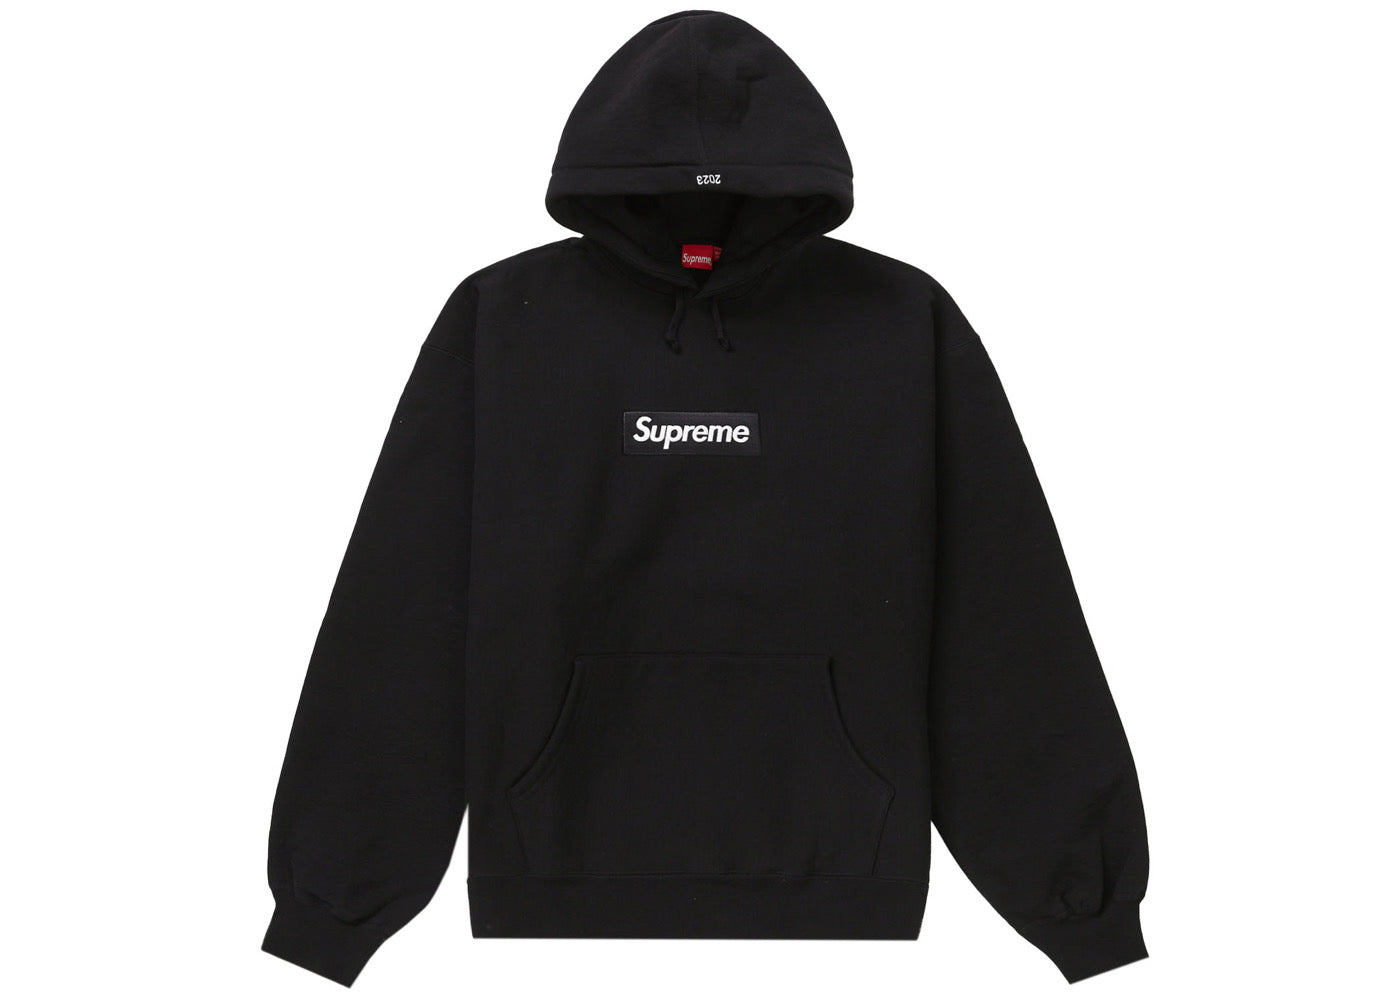 Supreme Clothing Goes Mainstream: What Does the Sale Mean For